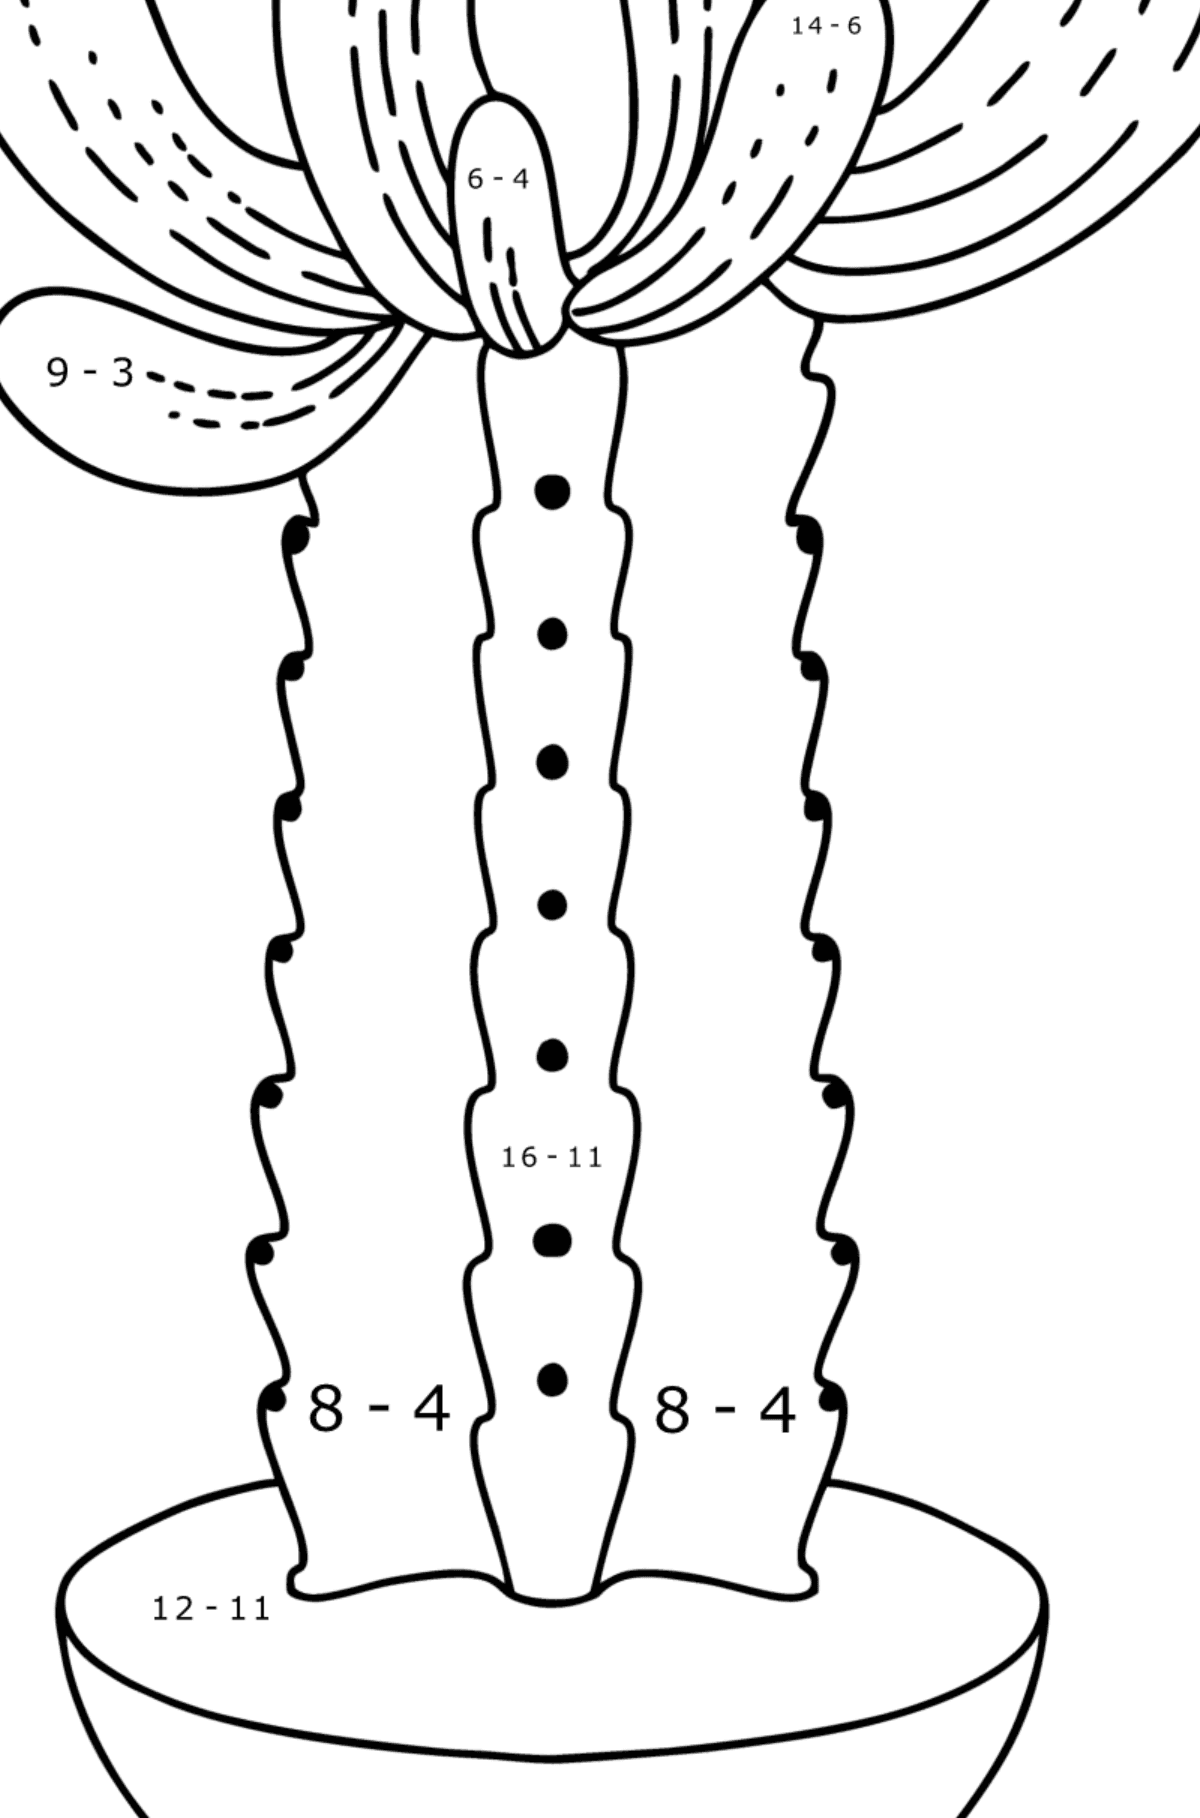 Simple cactus coloring page - Math Coloring - Subtraction for Kids